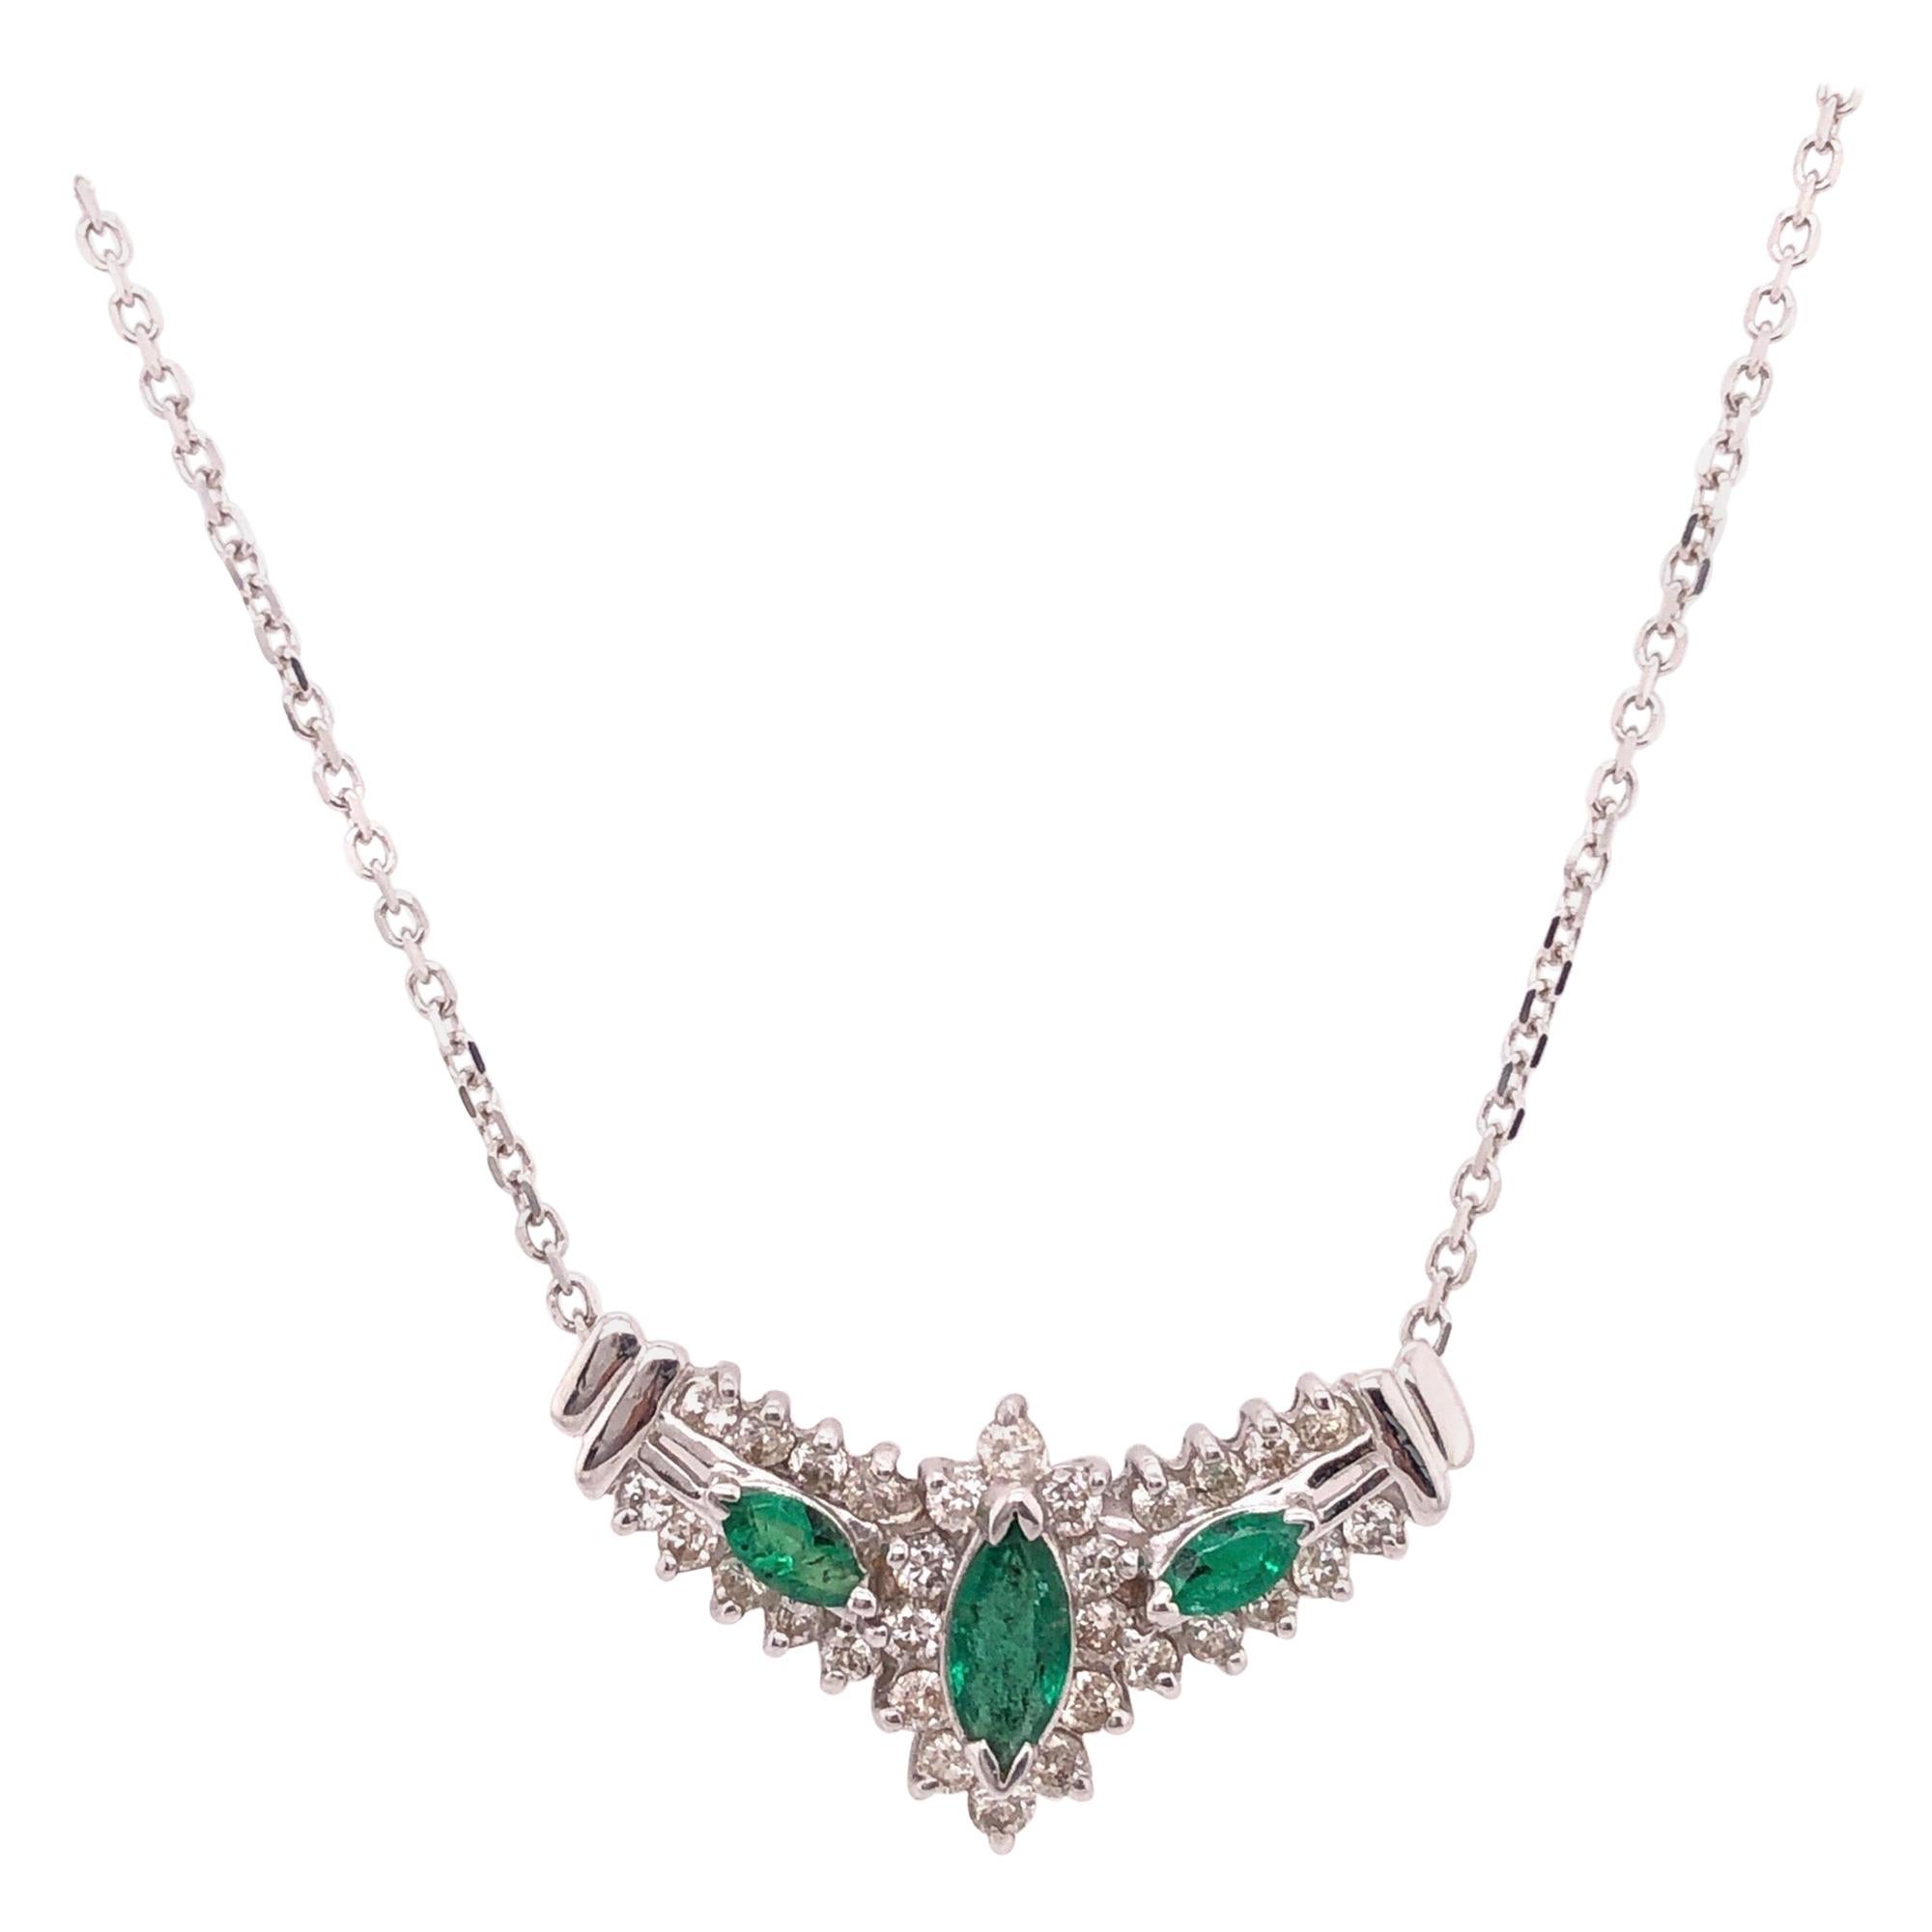 14 Karat White Gold Necklace with Soldered Diamond and Emerald Pendant